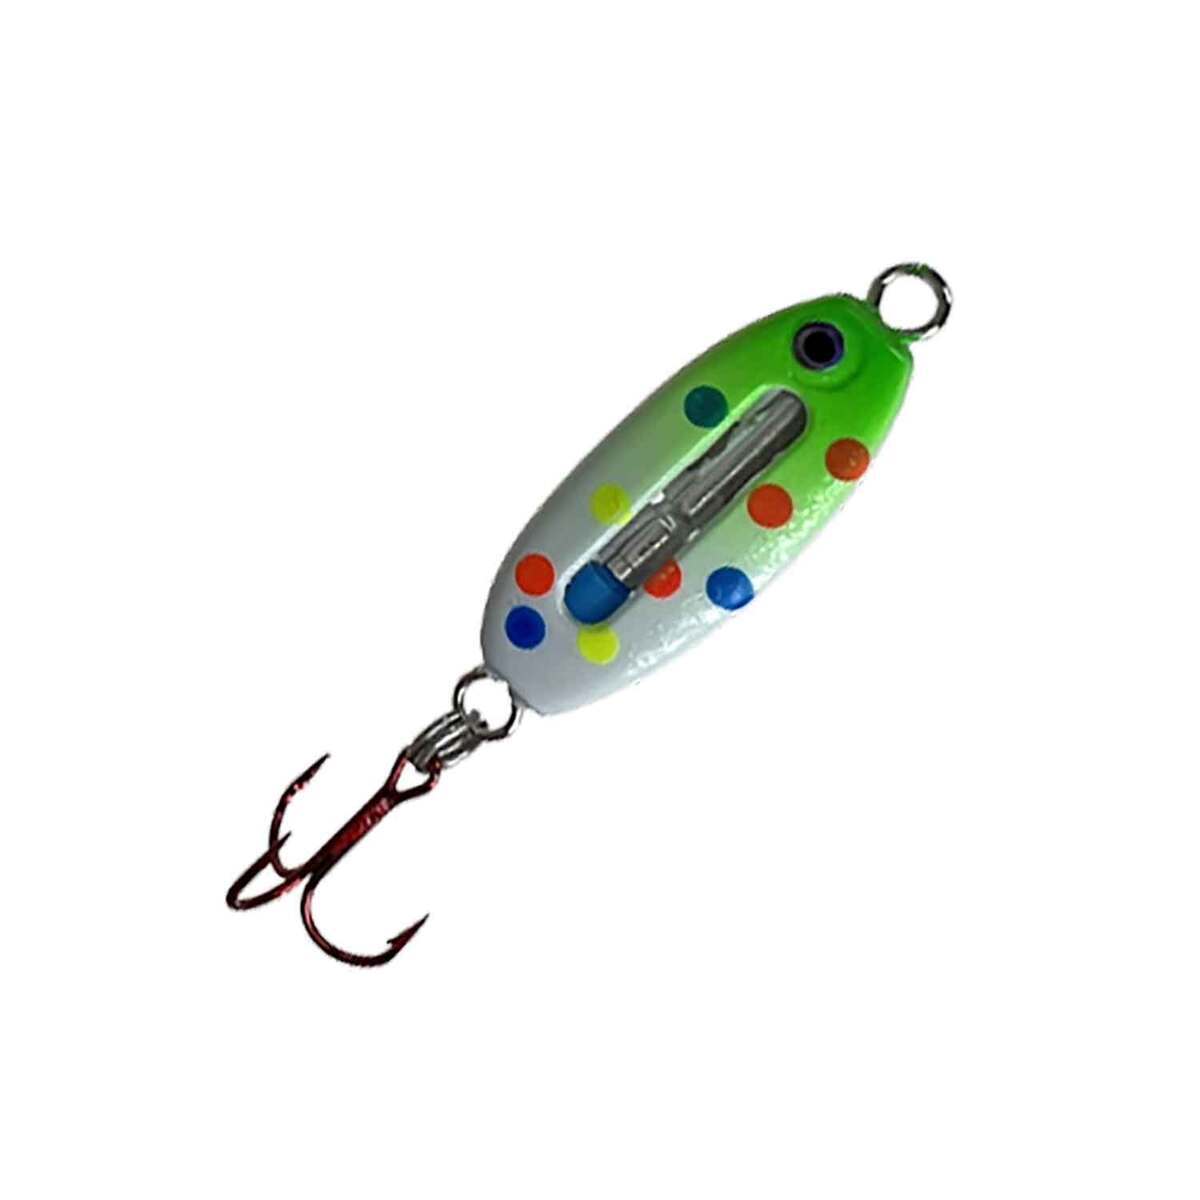 metal spoon fish lure, metal spoon fish lure Suppliers and Manufacturers at